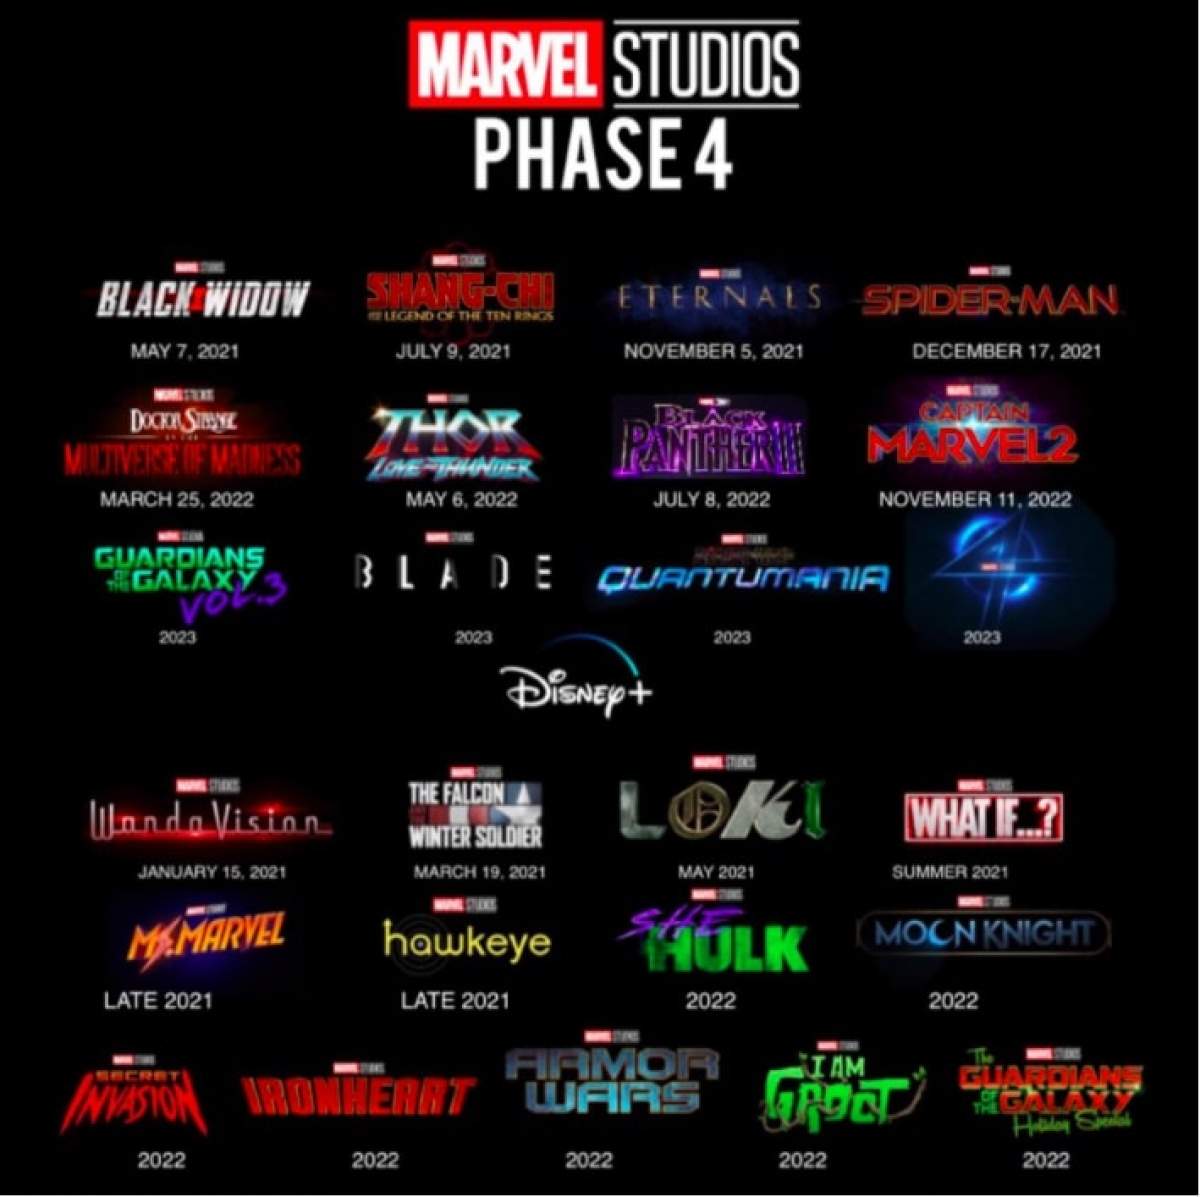 The Genesis of Marvel Phase 4, Have You Heard What is next! Scoop